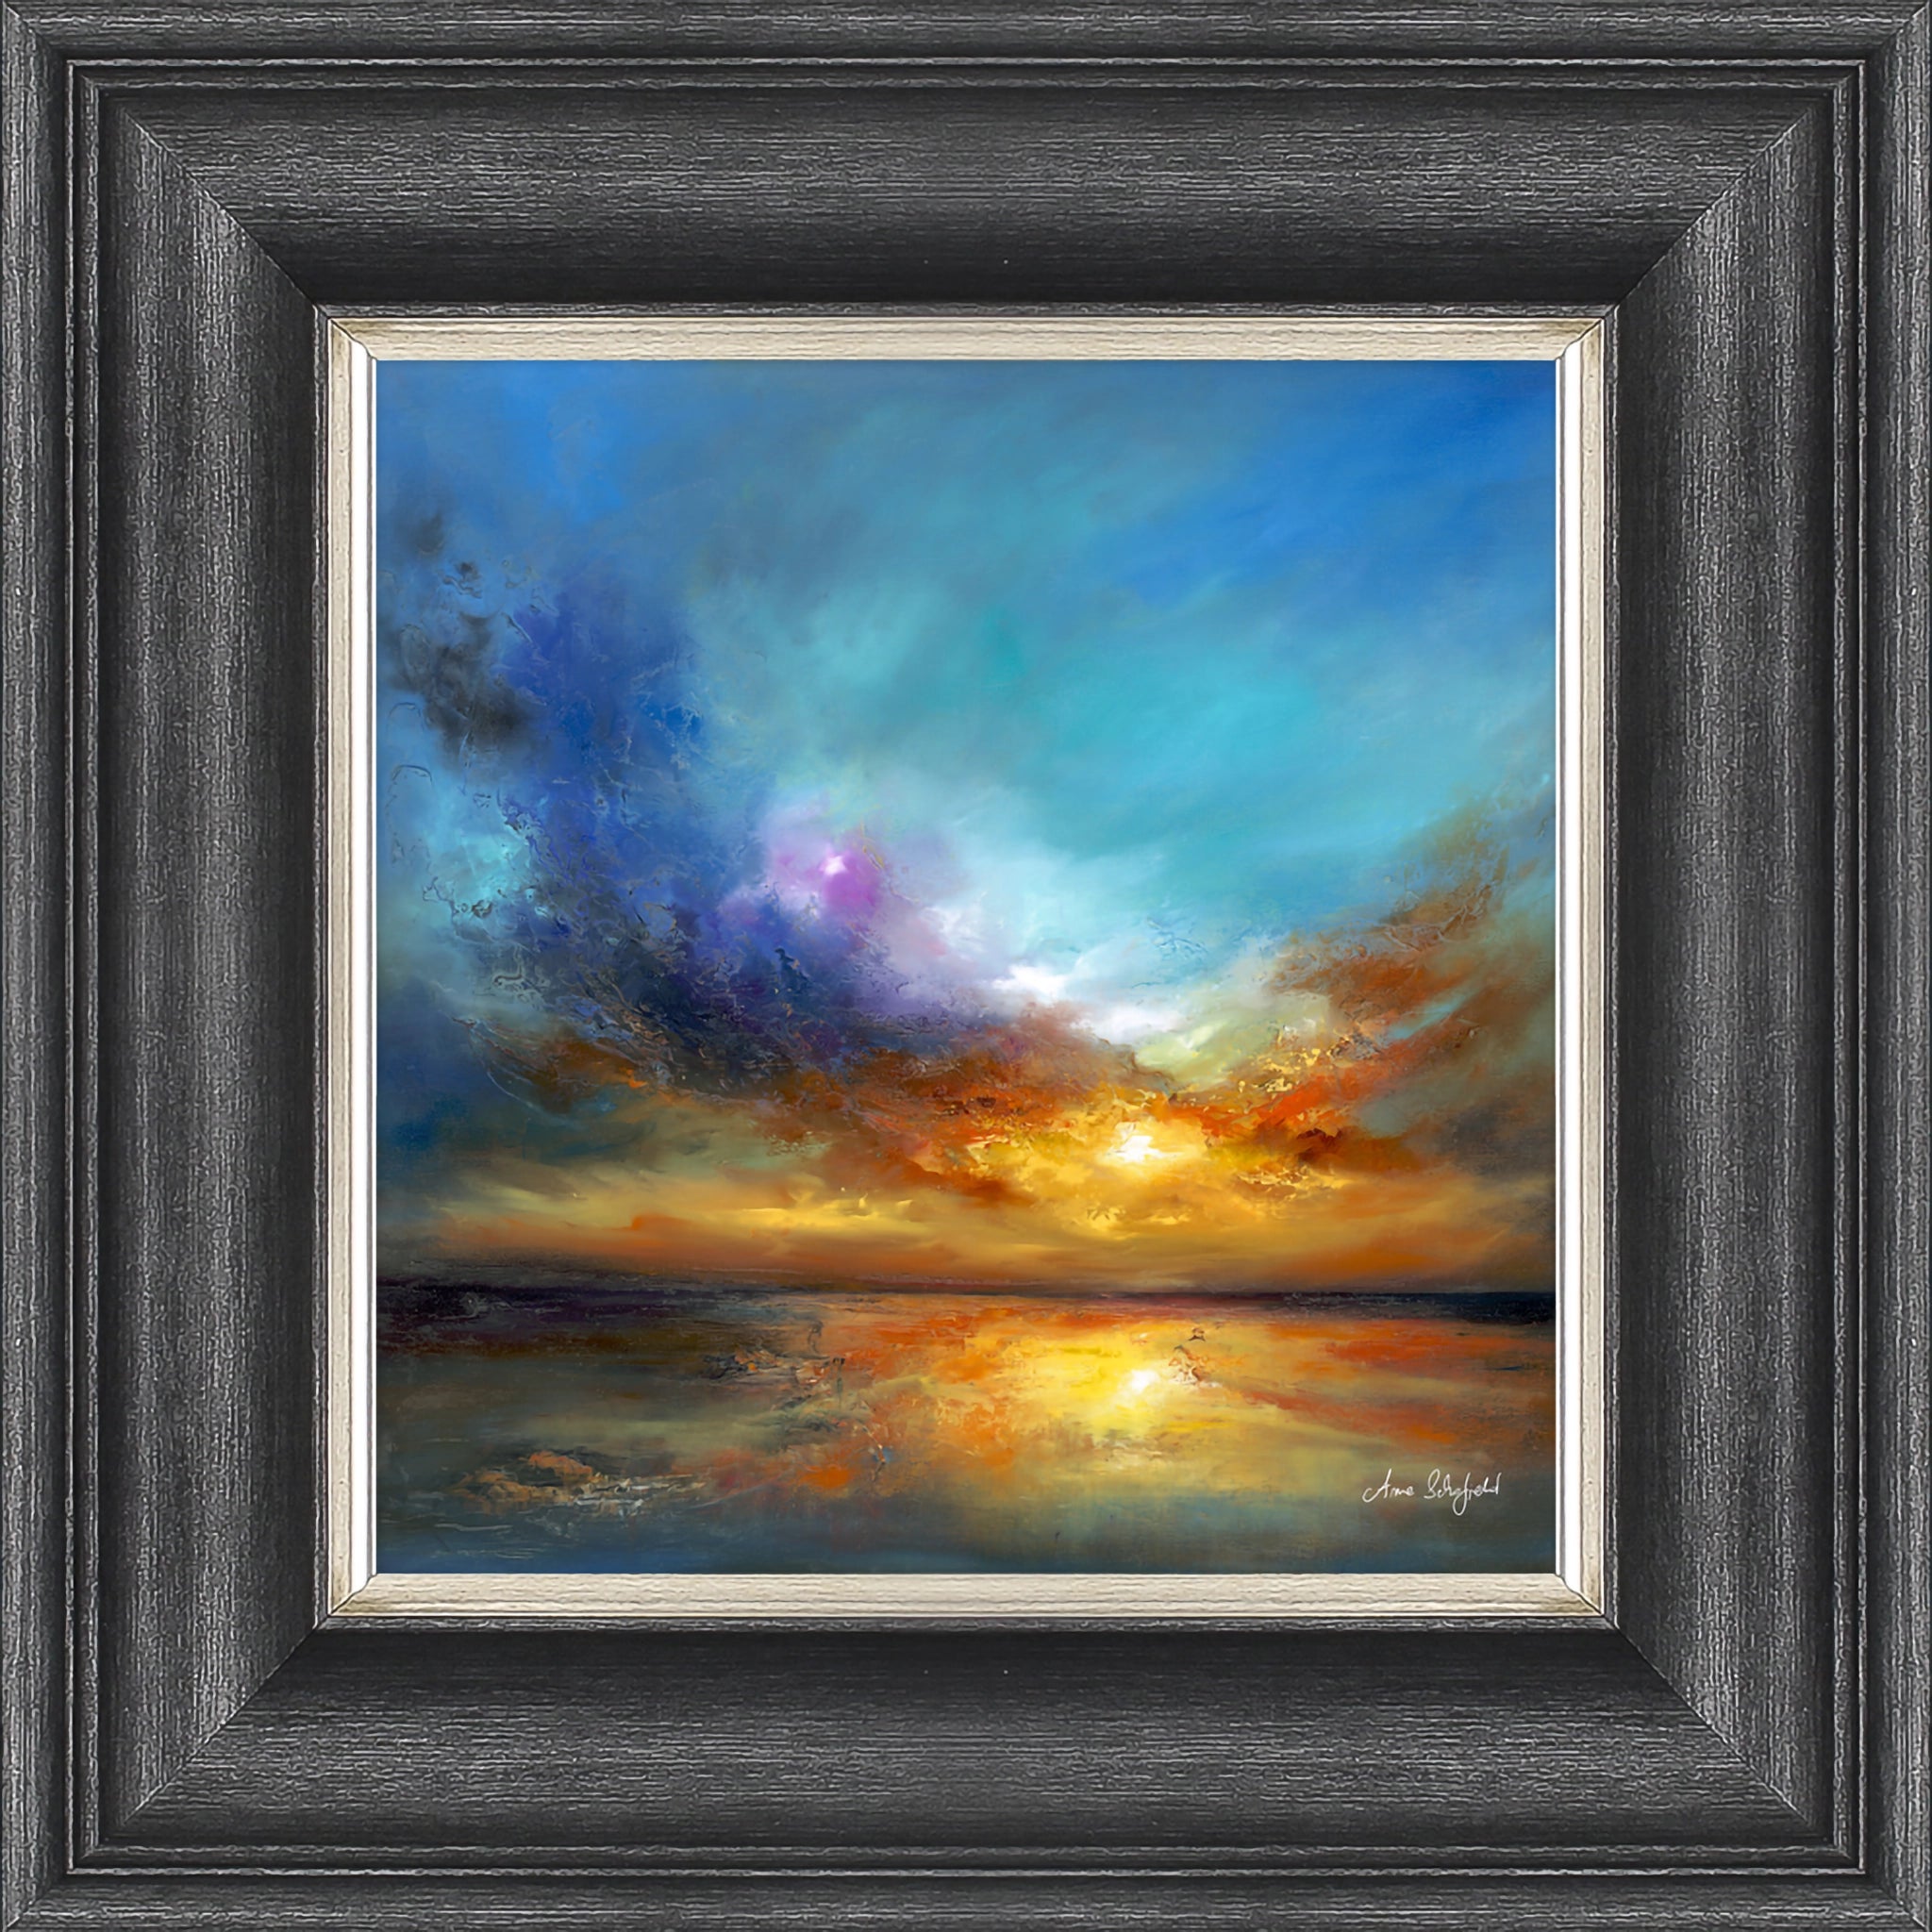 An abstract and colourful art print of a sunset